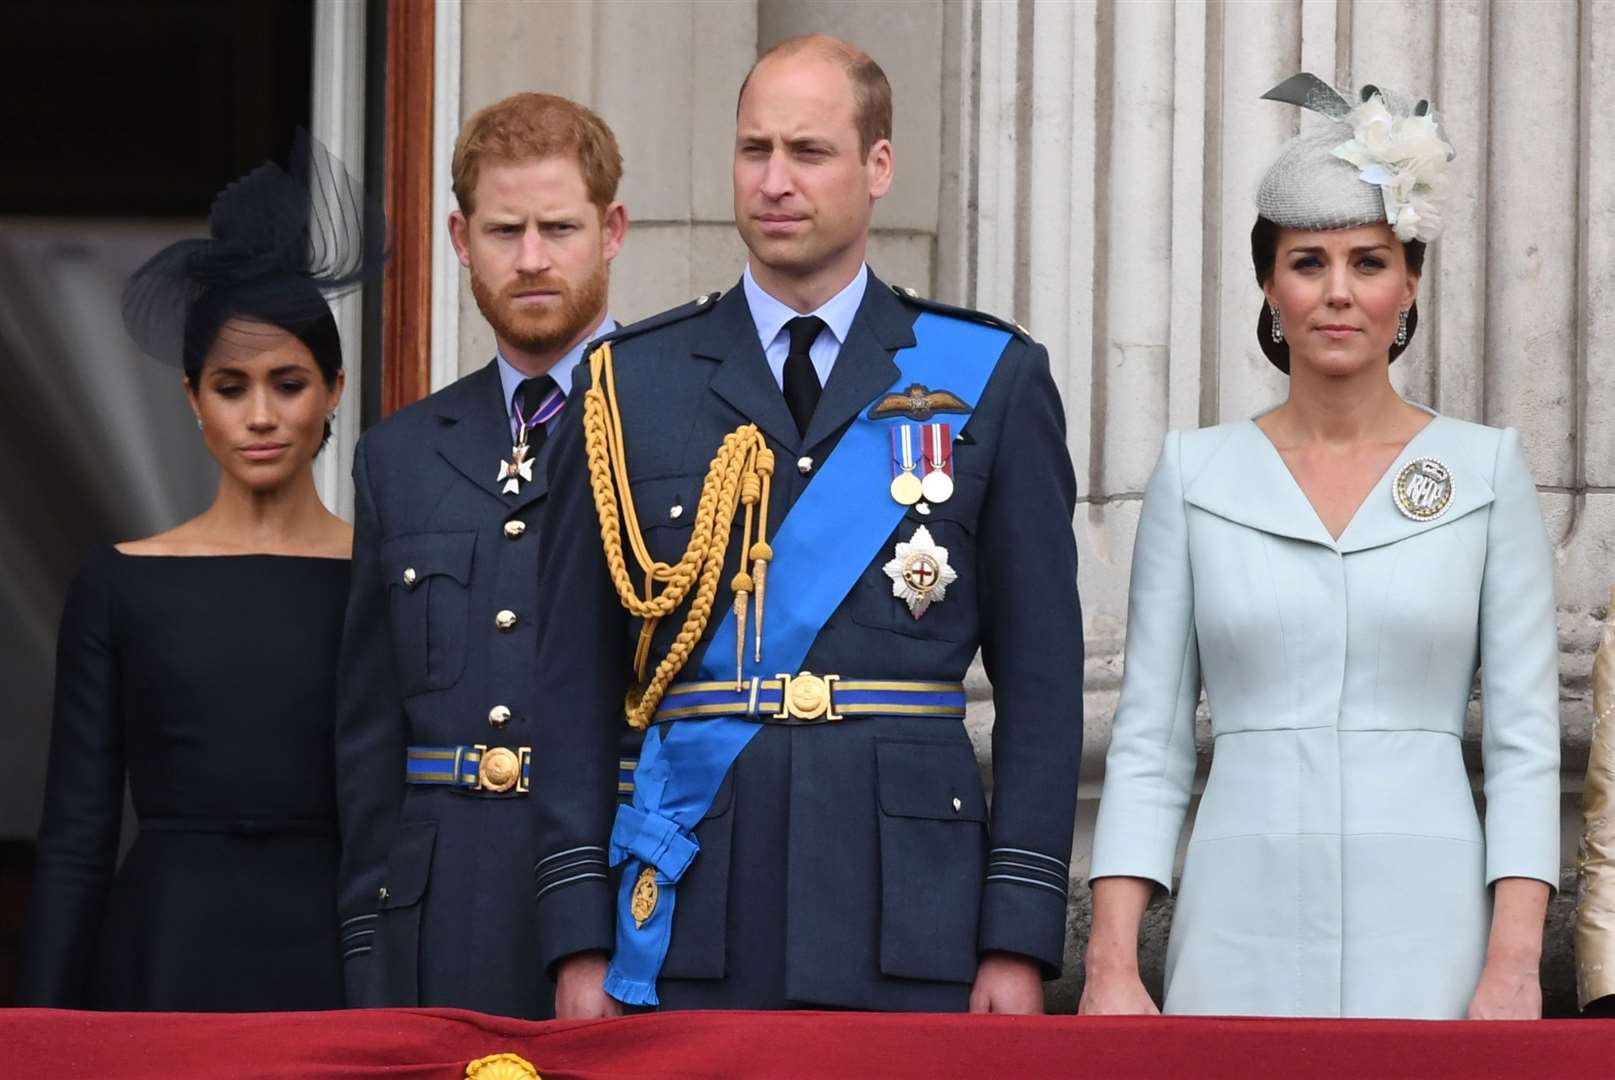 (left to right) The Duchess of Sussex, Duke of Sussex, William and Kate on the balcony at Buckingham Palace (Victoria Jones/PA)